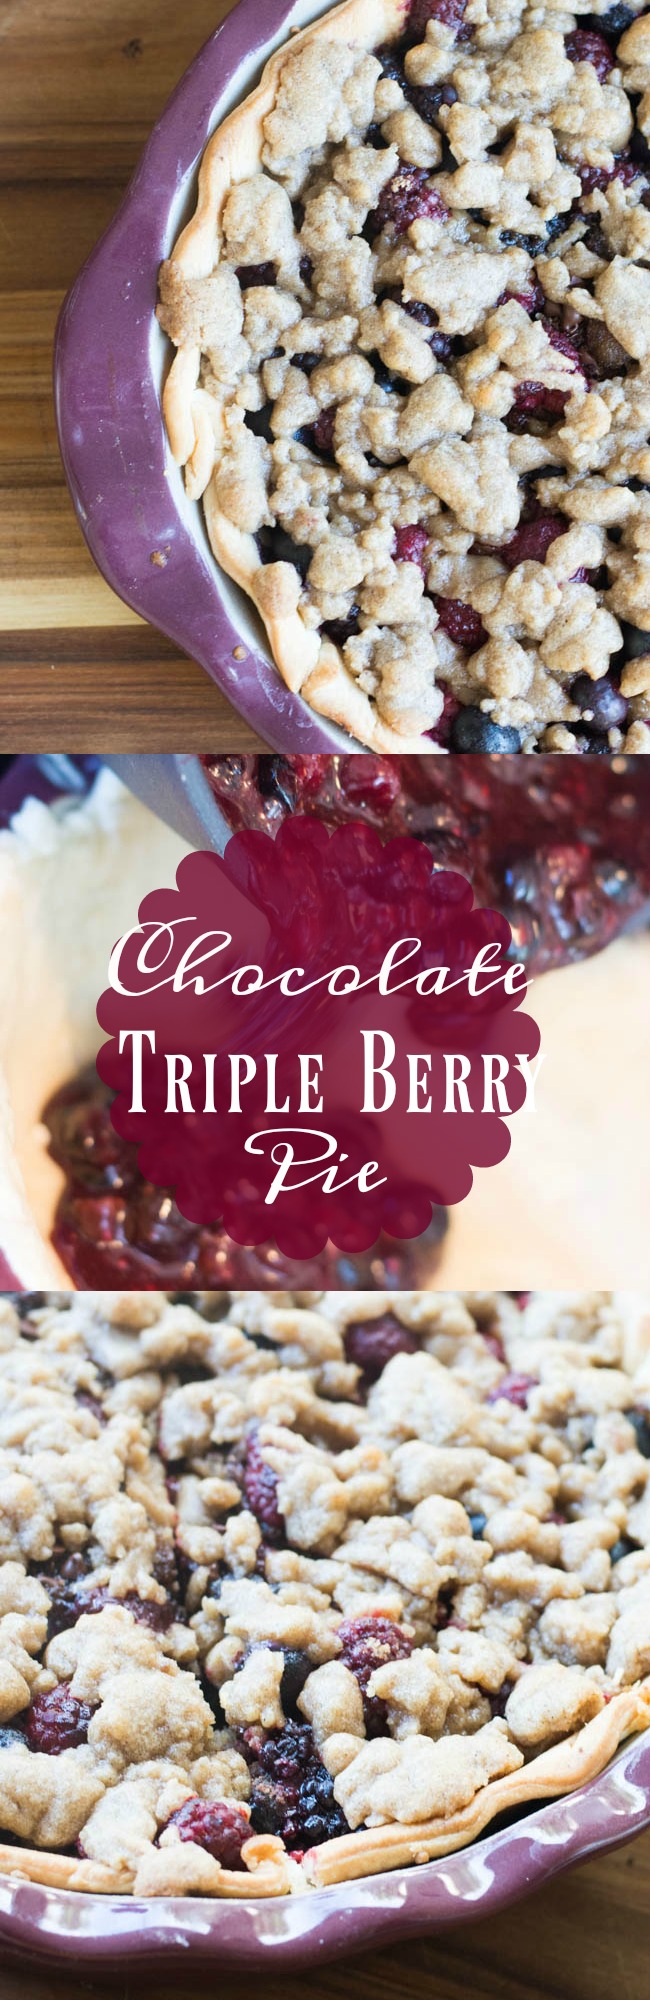 This chocolate triple berry pie recipe is full of AMAZING flavors that pair perfectly together. It's definitely the recipe that should be on your Thanksgiving table this year. 